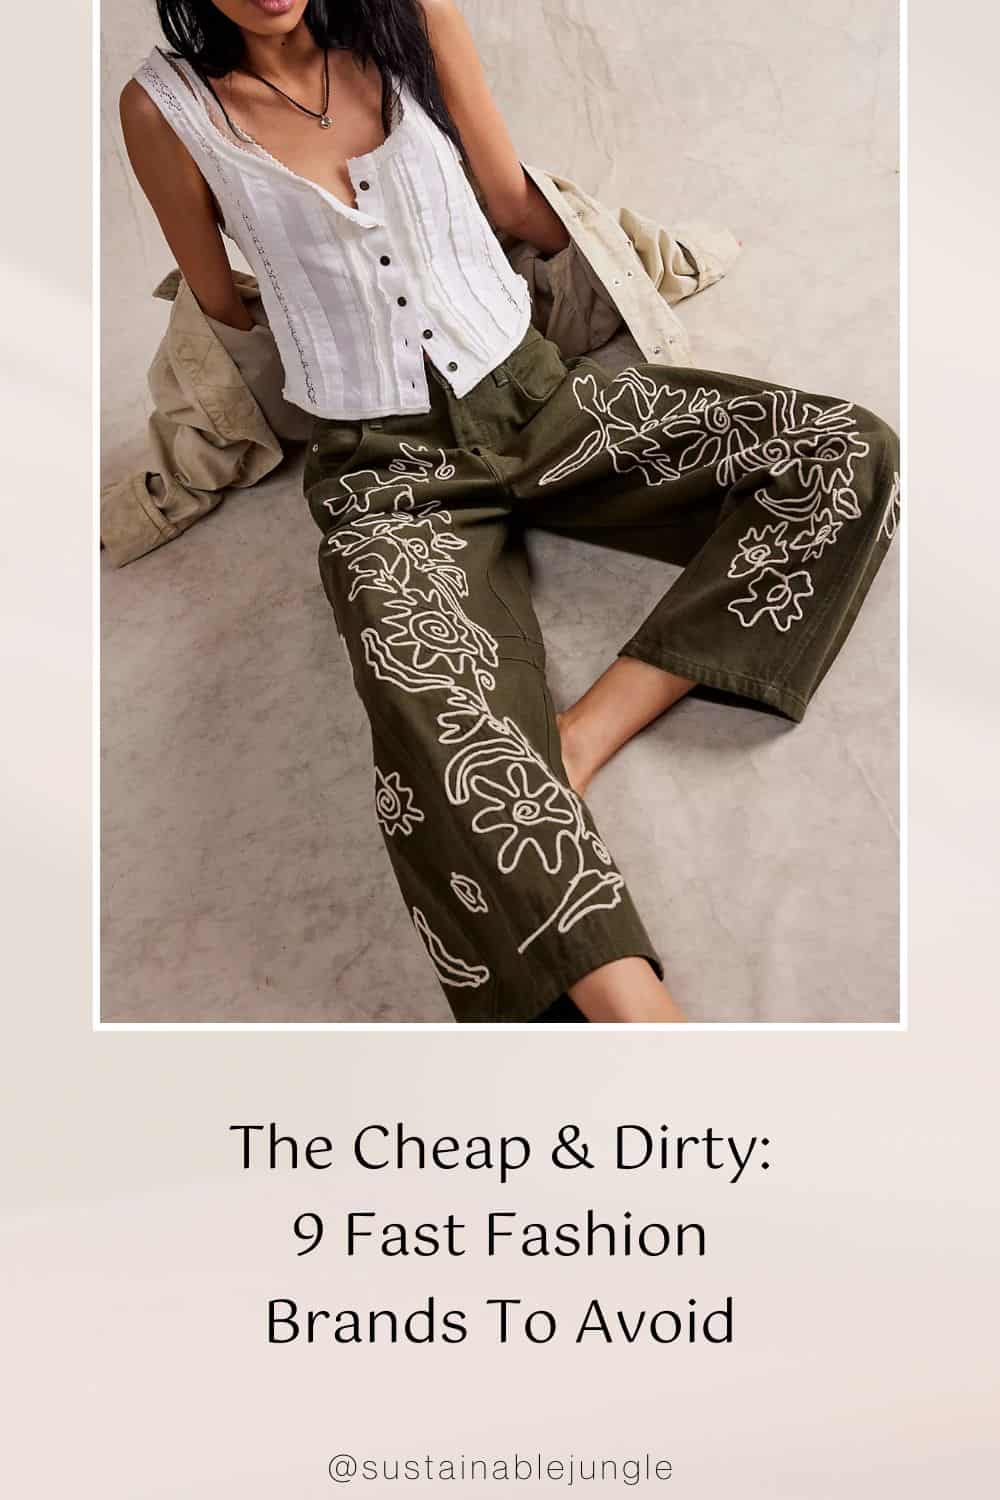 The Cheap & Dirty: 9 Fast Fashion Brands To Avoid Image by Free People #fastfashionbrandstoavoid #listoffastfashionbrandstoavoid #worstfastfashionbrands #worstclothingbrands #fastfashiontoavoid #sustainablejungle